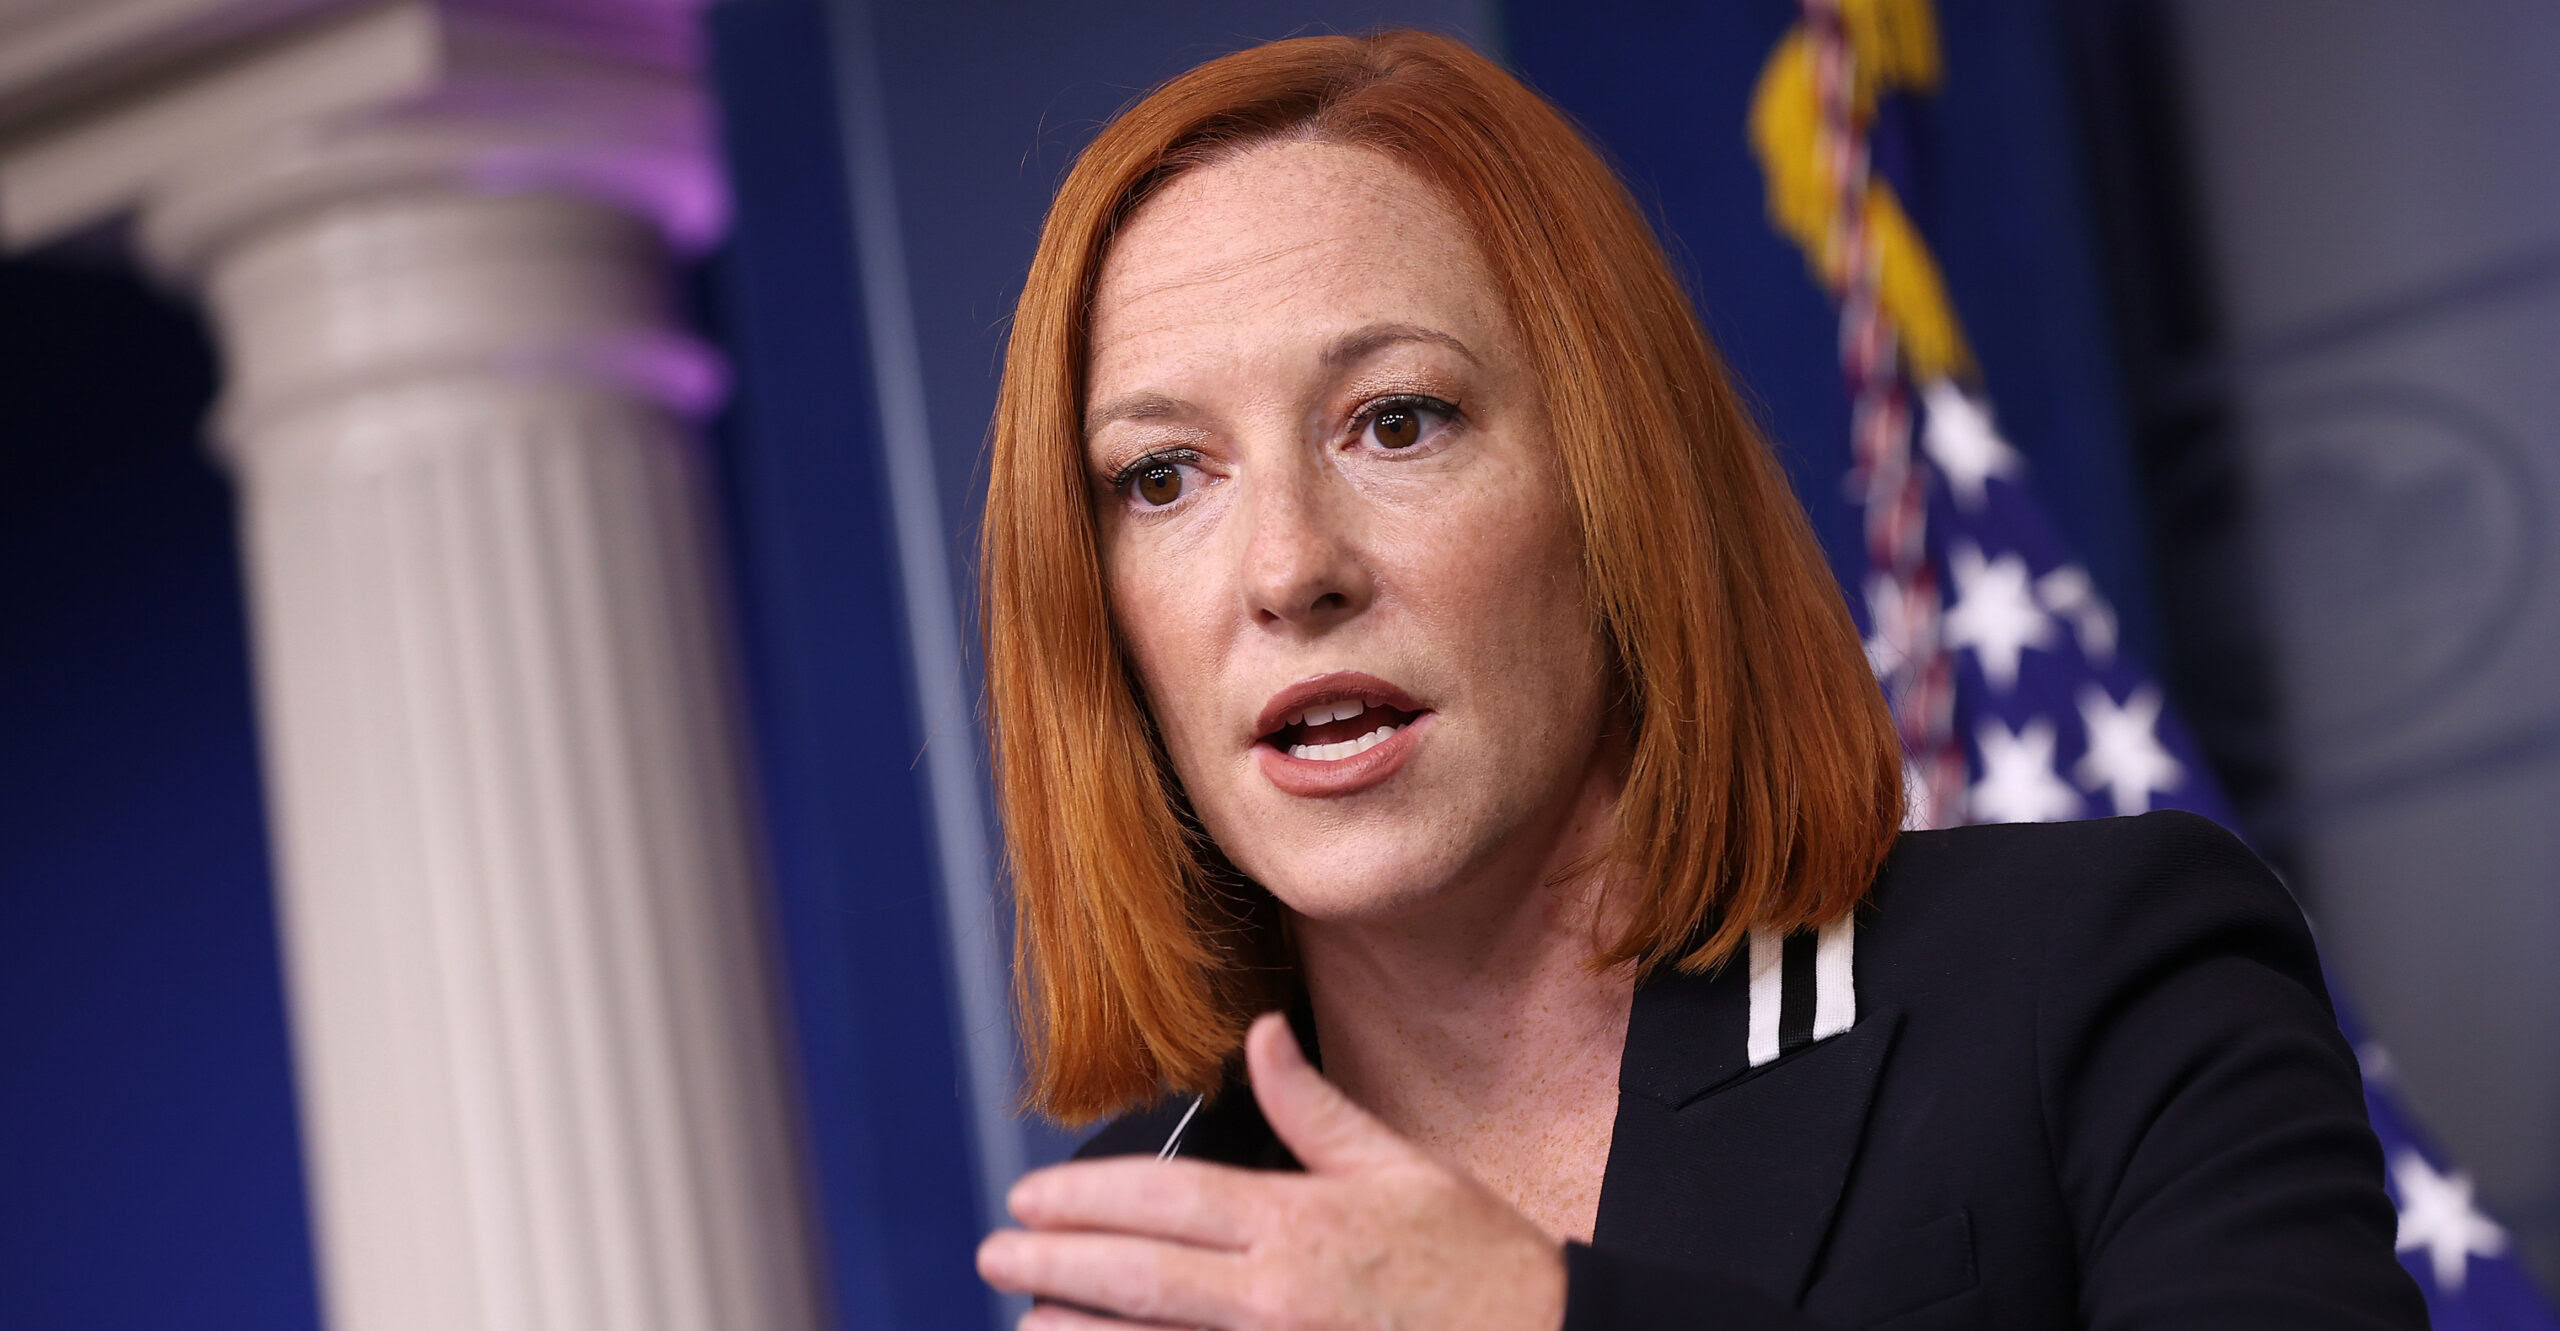 Psaki Dismisses Male Reporter’s Abortion Question: ‘You’ve Never Faced Those Choices’